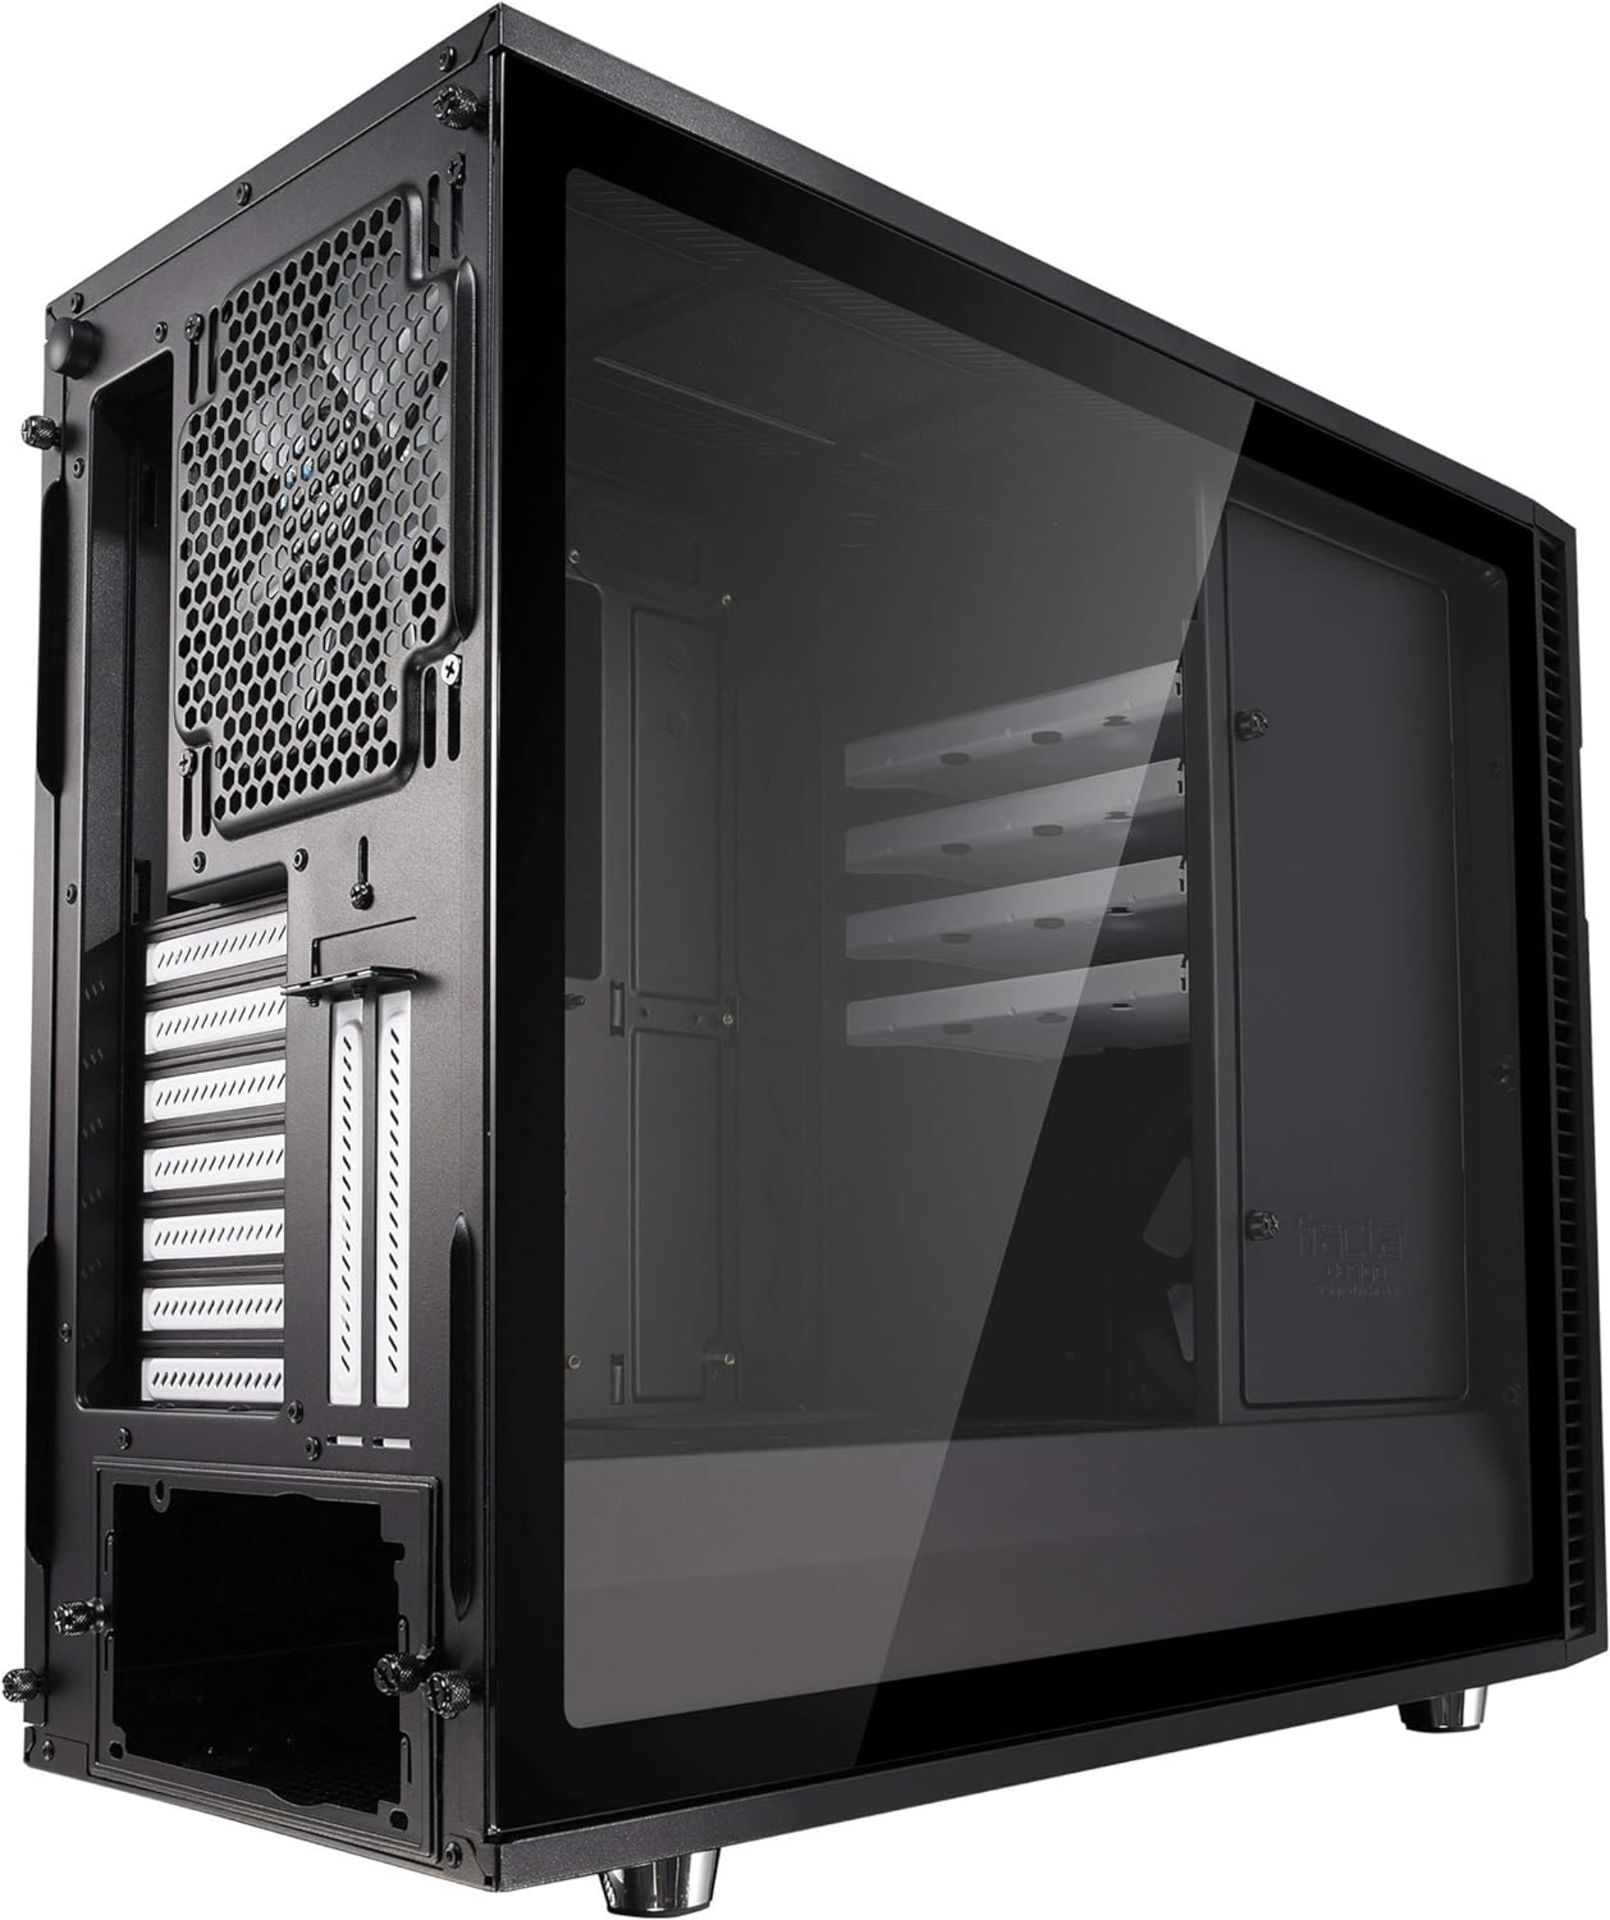 NEW & BOXED FRACTAL DESIGN Define R6 Mid Tower ATX Computer Case- BLACK. RRP £161.94. (R6-7). - Image 5 of 8